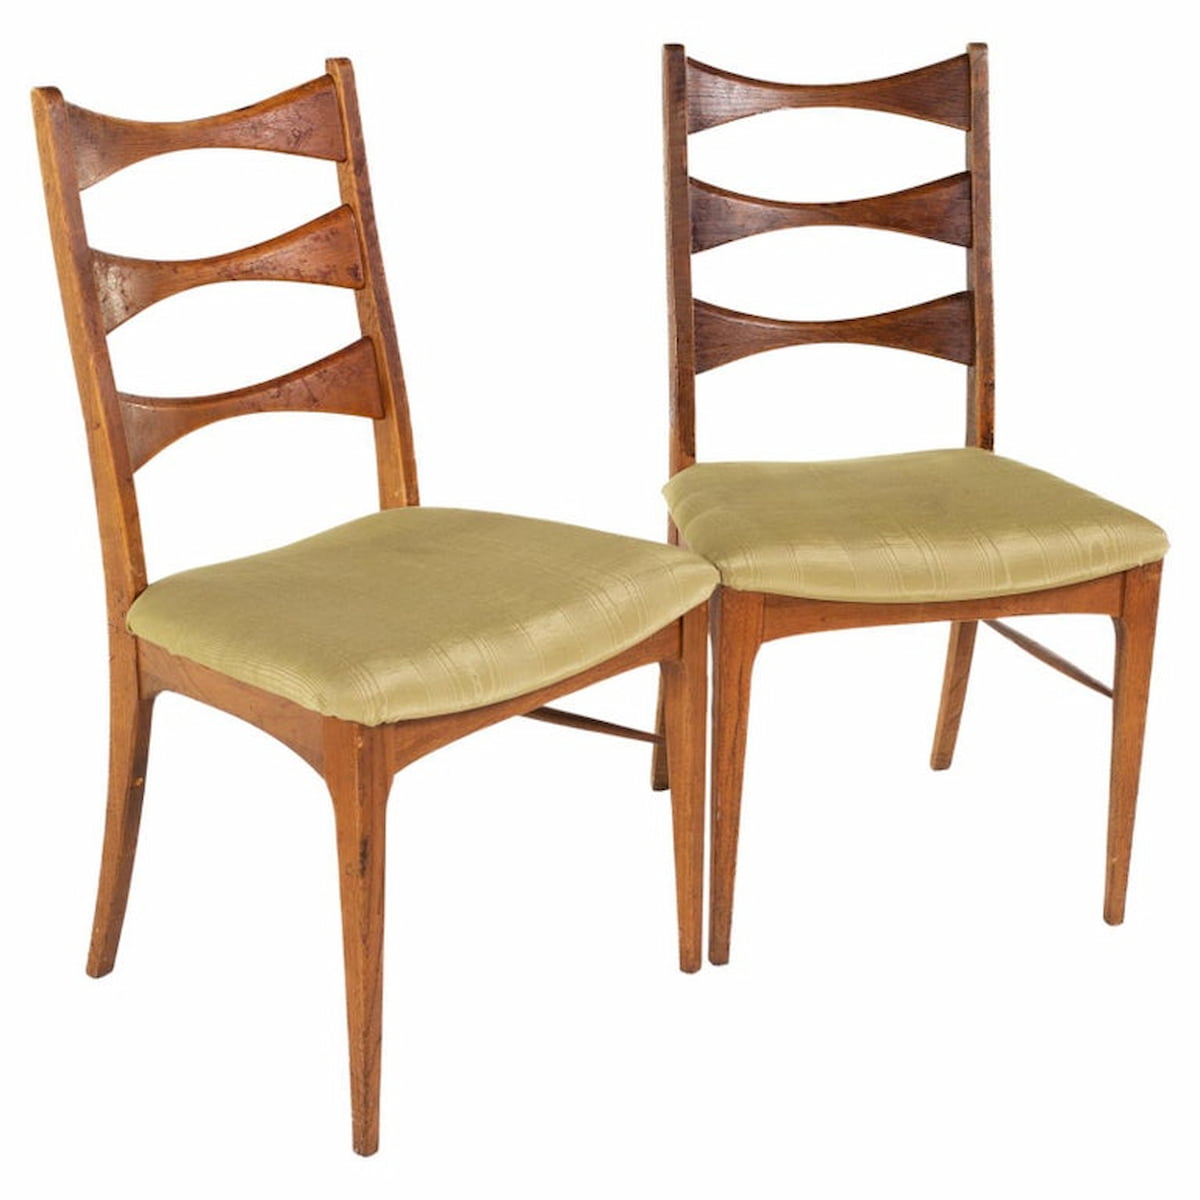 Heywood Wakefield Style Mid Century Ladder Back Chairs - Pair